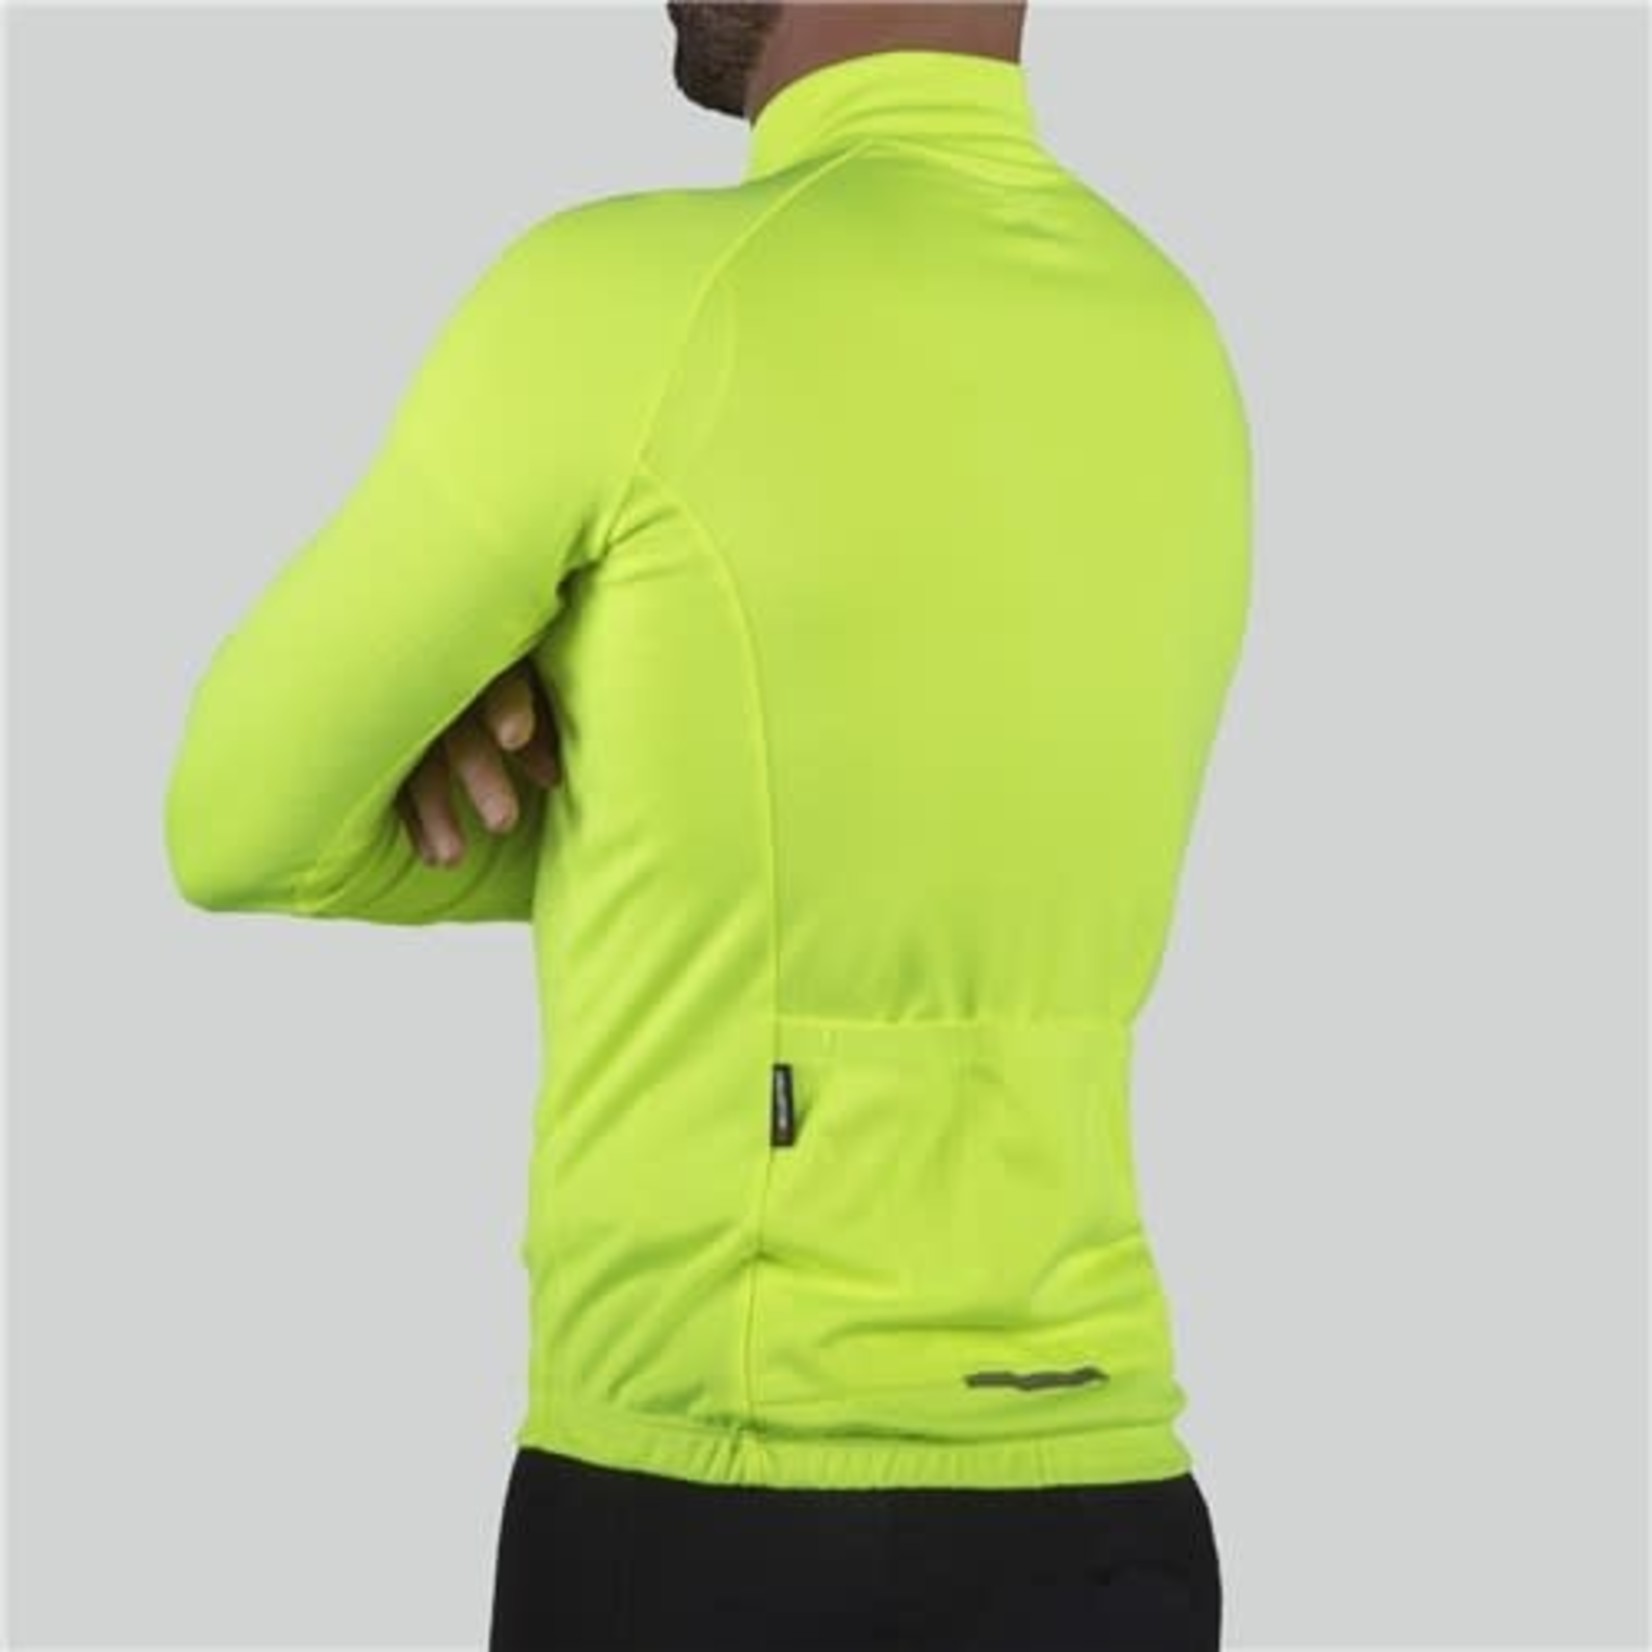 Bellwether Bellwether Thermal Draft Men's Semi-Fitted Long Sleeve Jersey - Hi-Vis